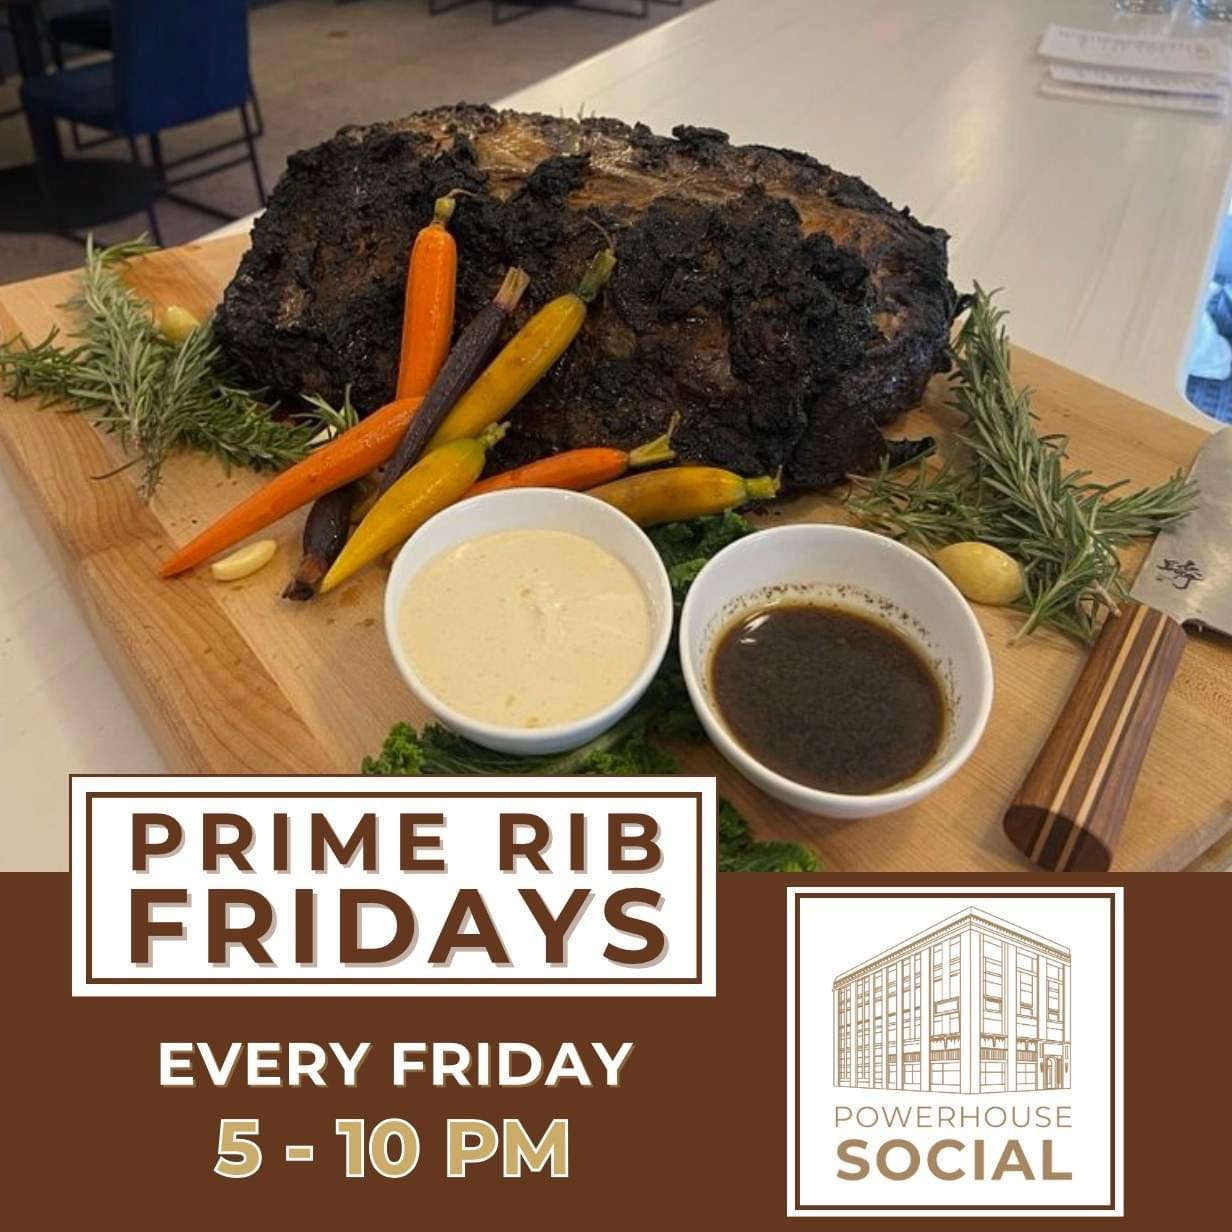 Join us for Prime Rib Friday at Powerhouse Social! 🥩 Dive into the night with our perfectly crafted Prime Rib, available every Friday. Treat yourself to a meal designed just for you. Don't miss this delicious tradition! 🌟 #PowerhouseSocial #Powerho